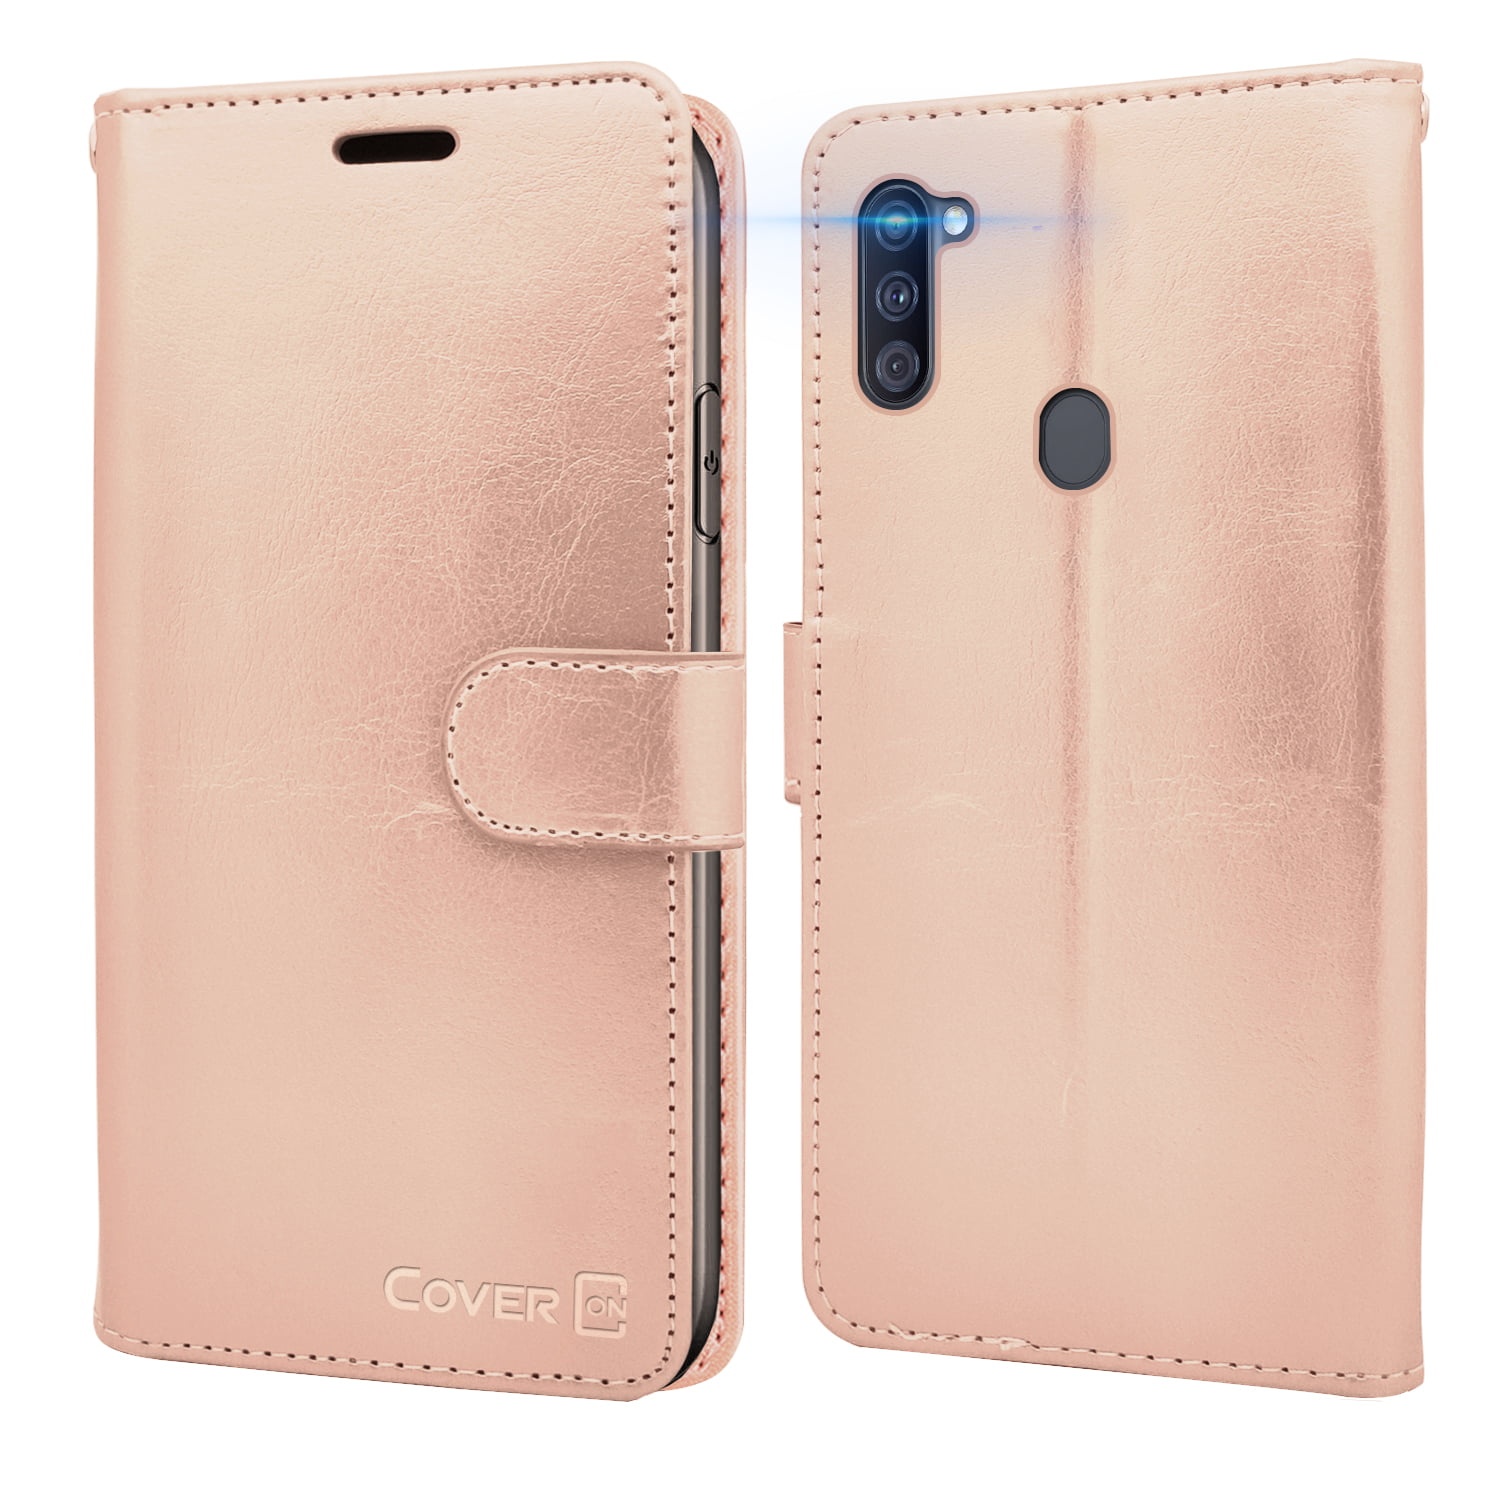 M11 Rose Gold YYT LEMAXELERS Galaxy A11 Case Classic Wallet Cover PU Flip Leather Premium Vogue Business Wallet Case with Kickstand and Card Slots Shockproof Phone Cover for Samsung Galaxy A11